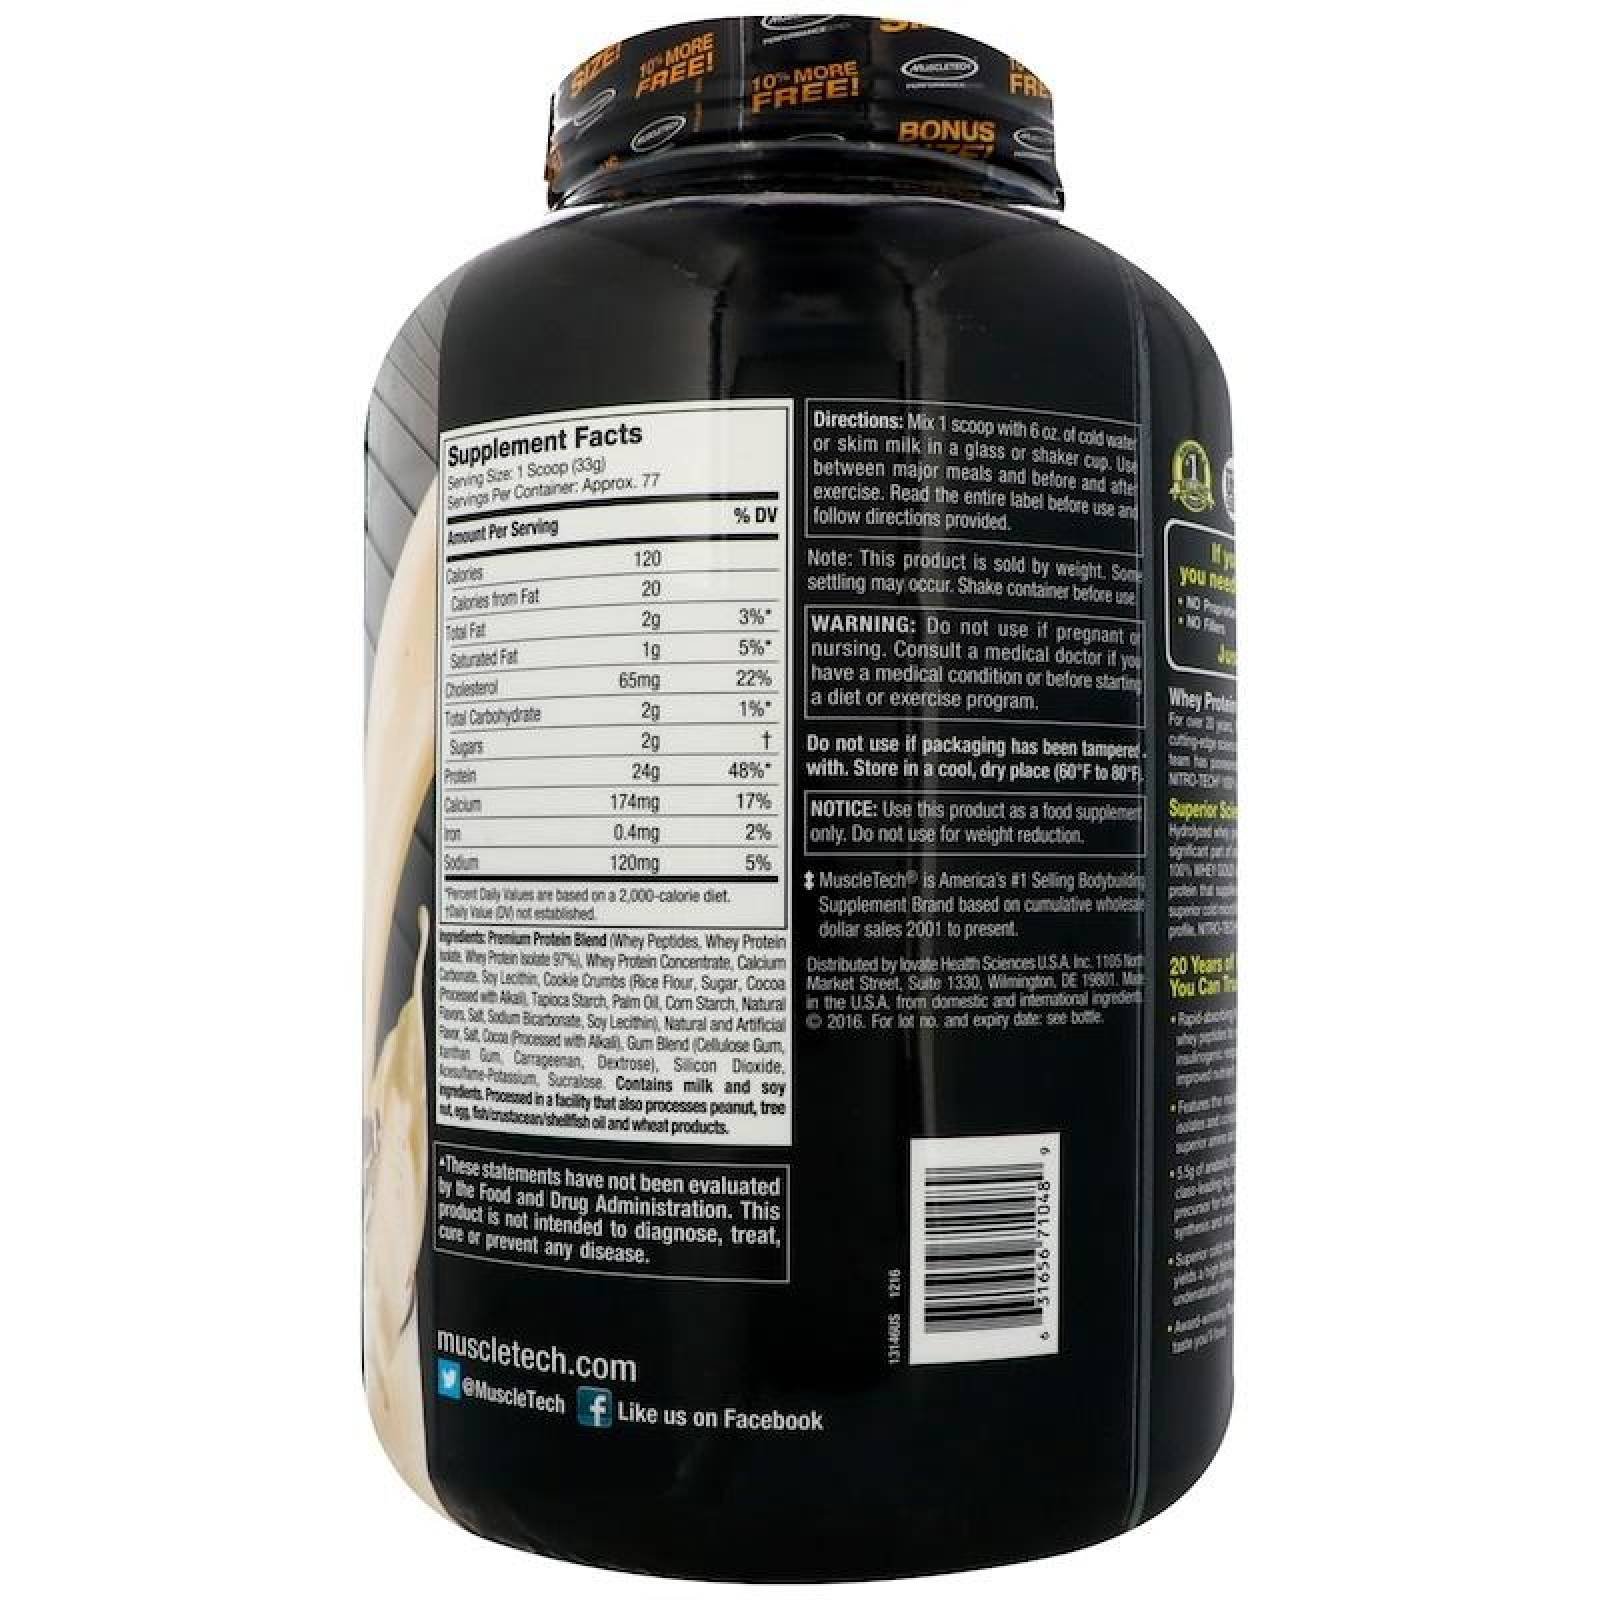 Proteína NitroTech 100% Whey Gold5.5 Lbs Sabor Cookies And Cream Muscletech. 